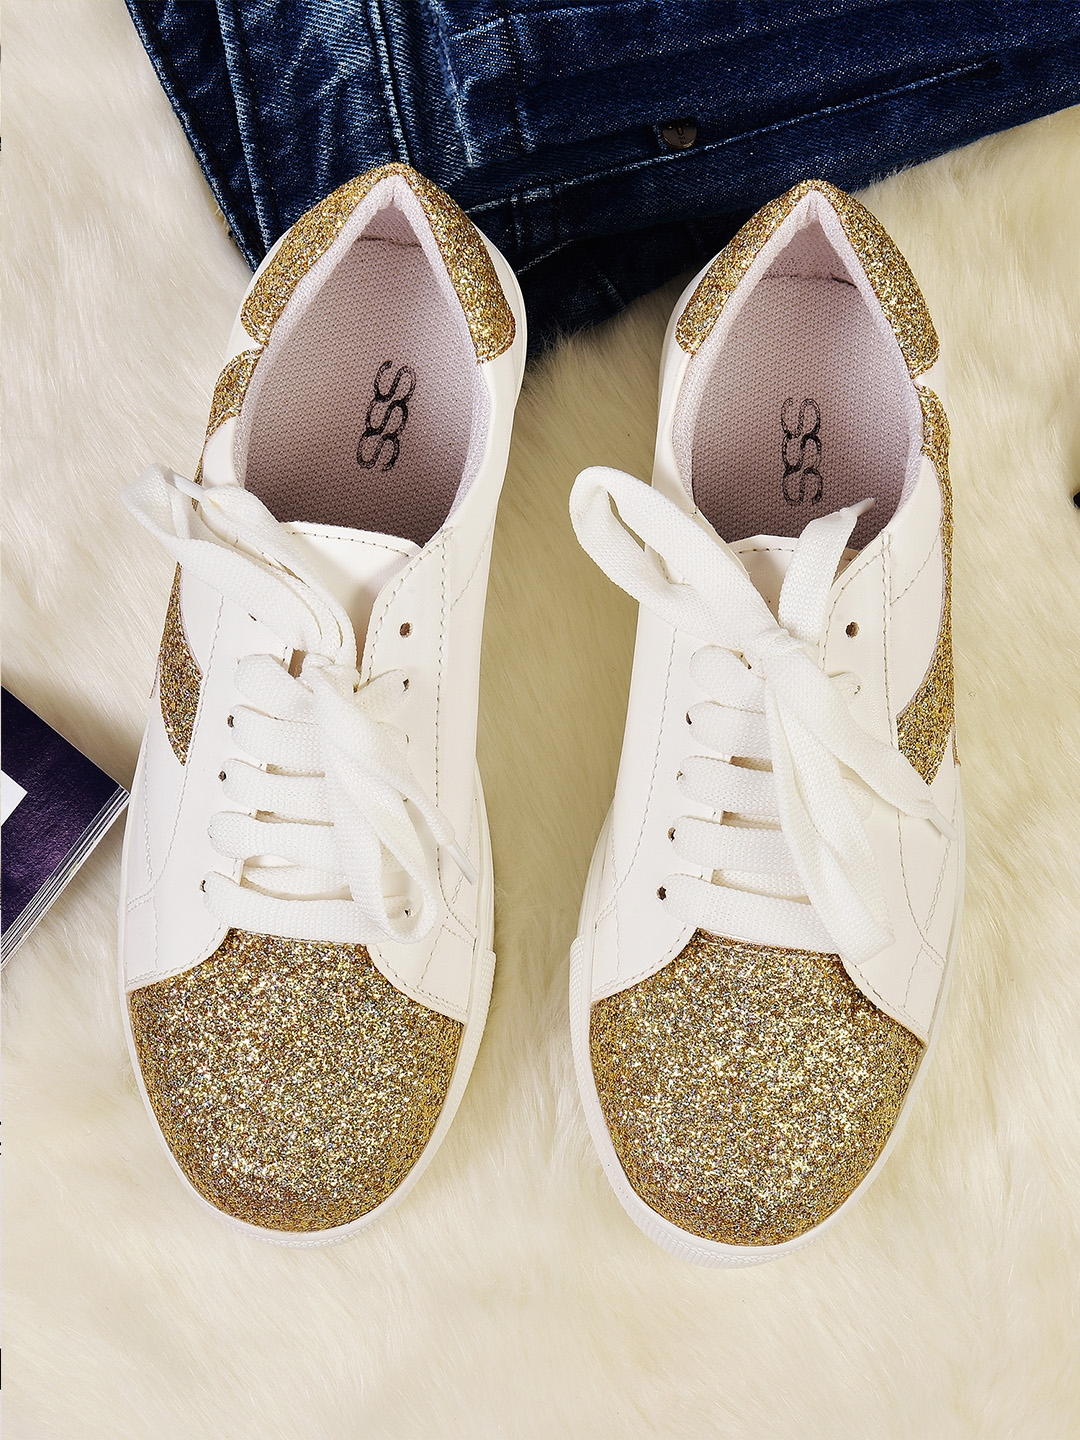 white sequin shoes womens